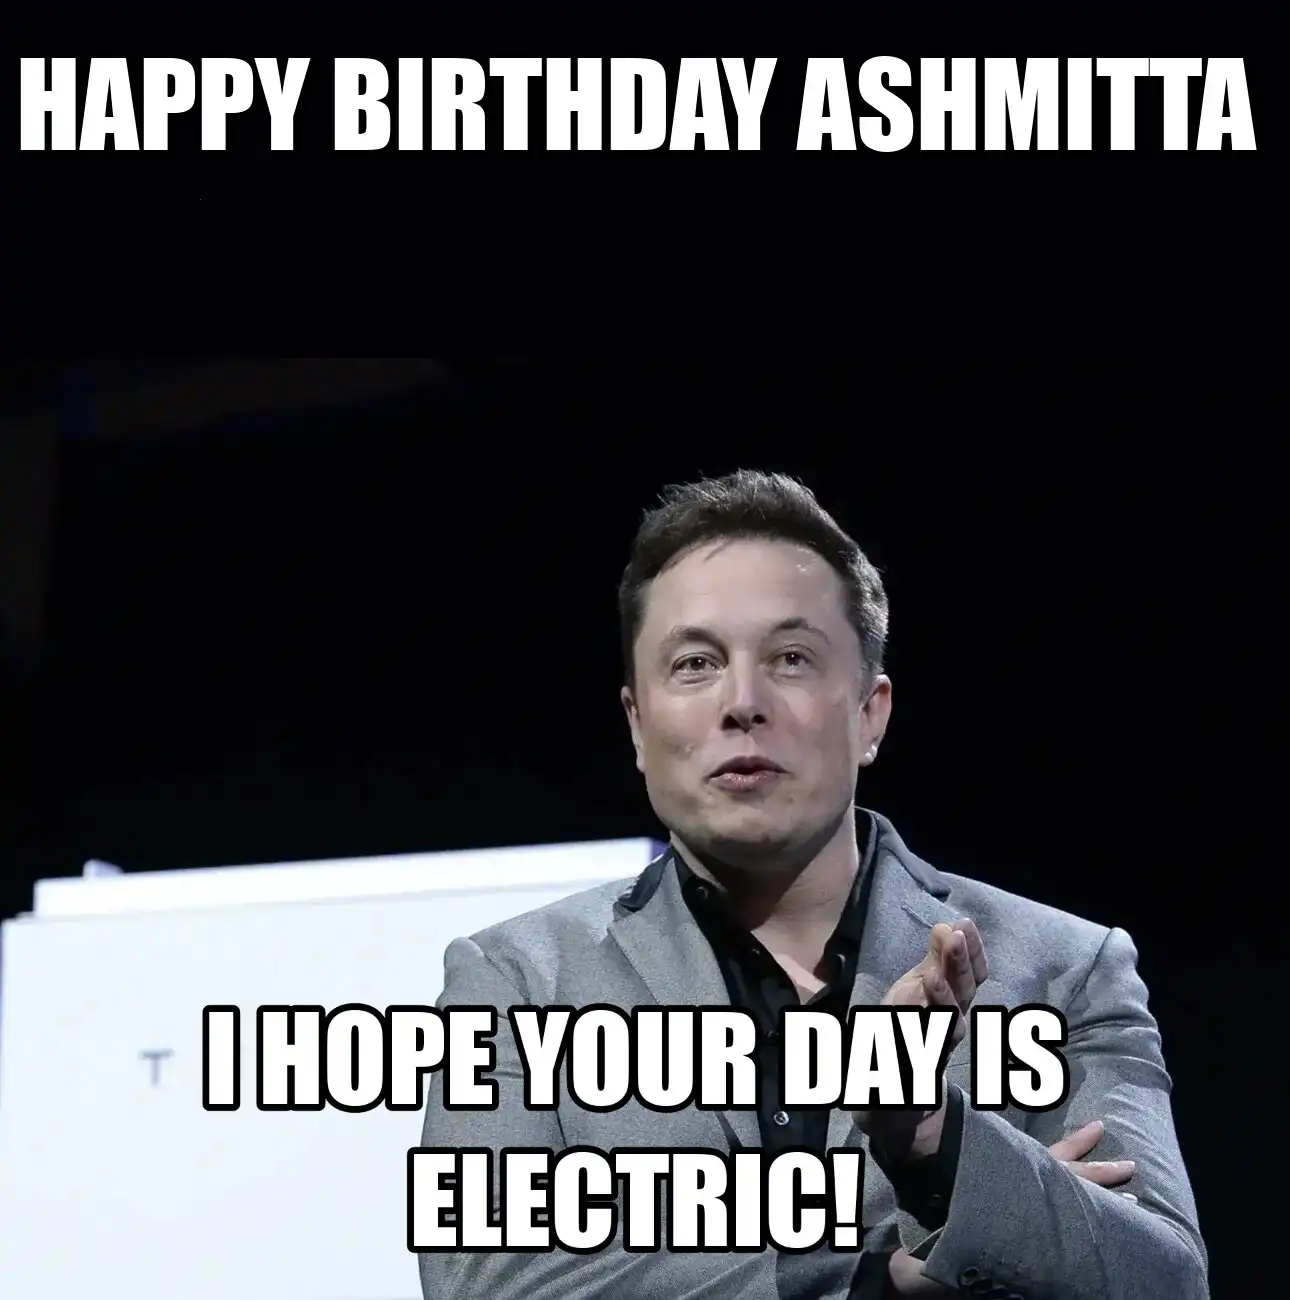 Happy Birthday Ashmitta I Hope Your Day Is Electric Meme